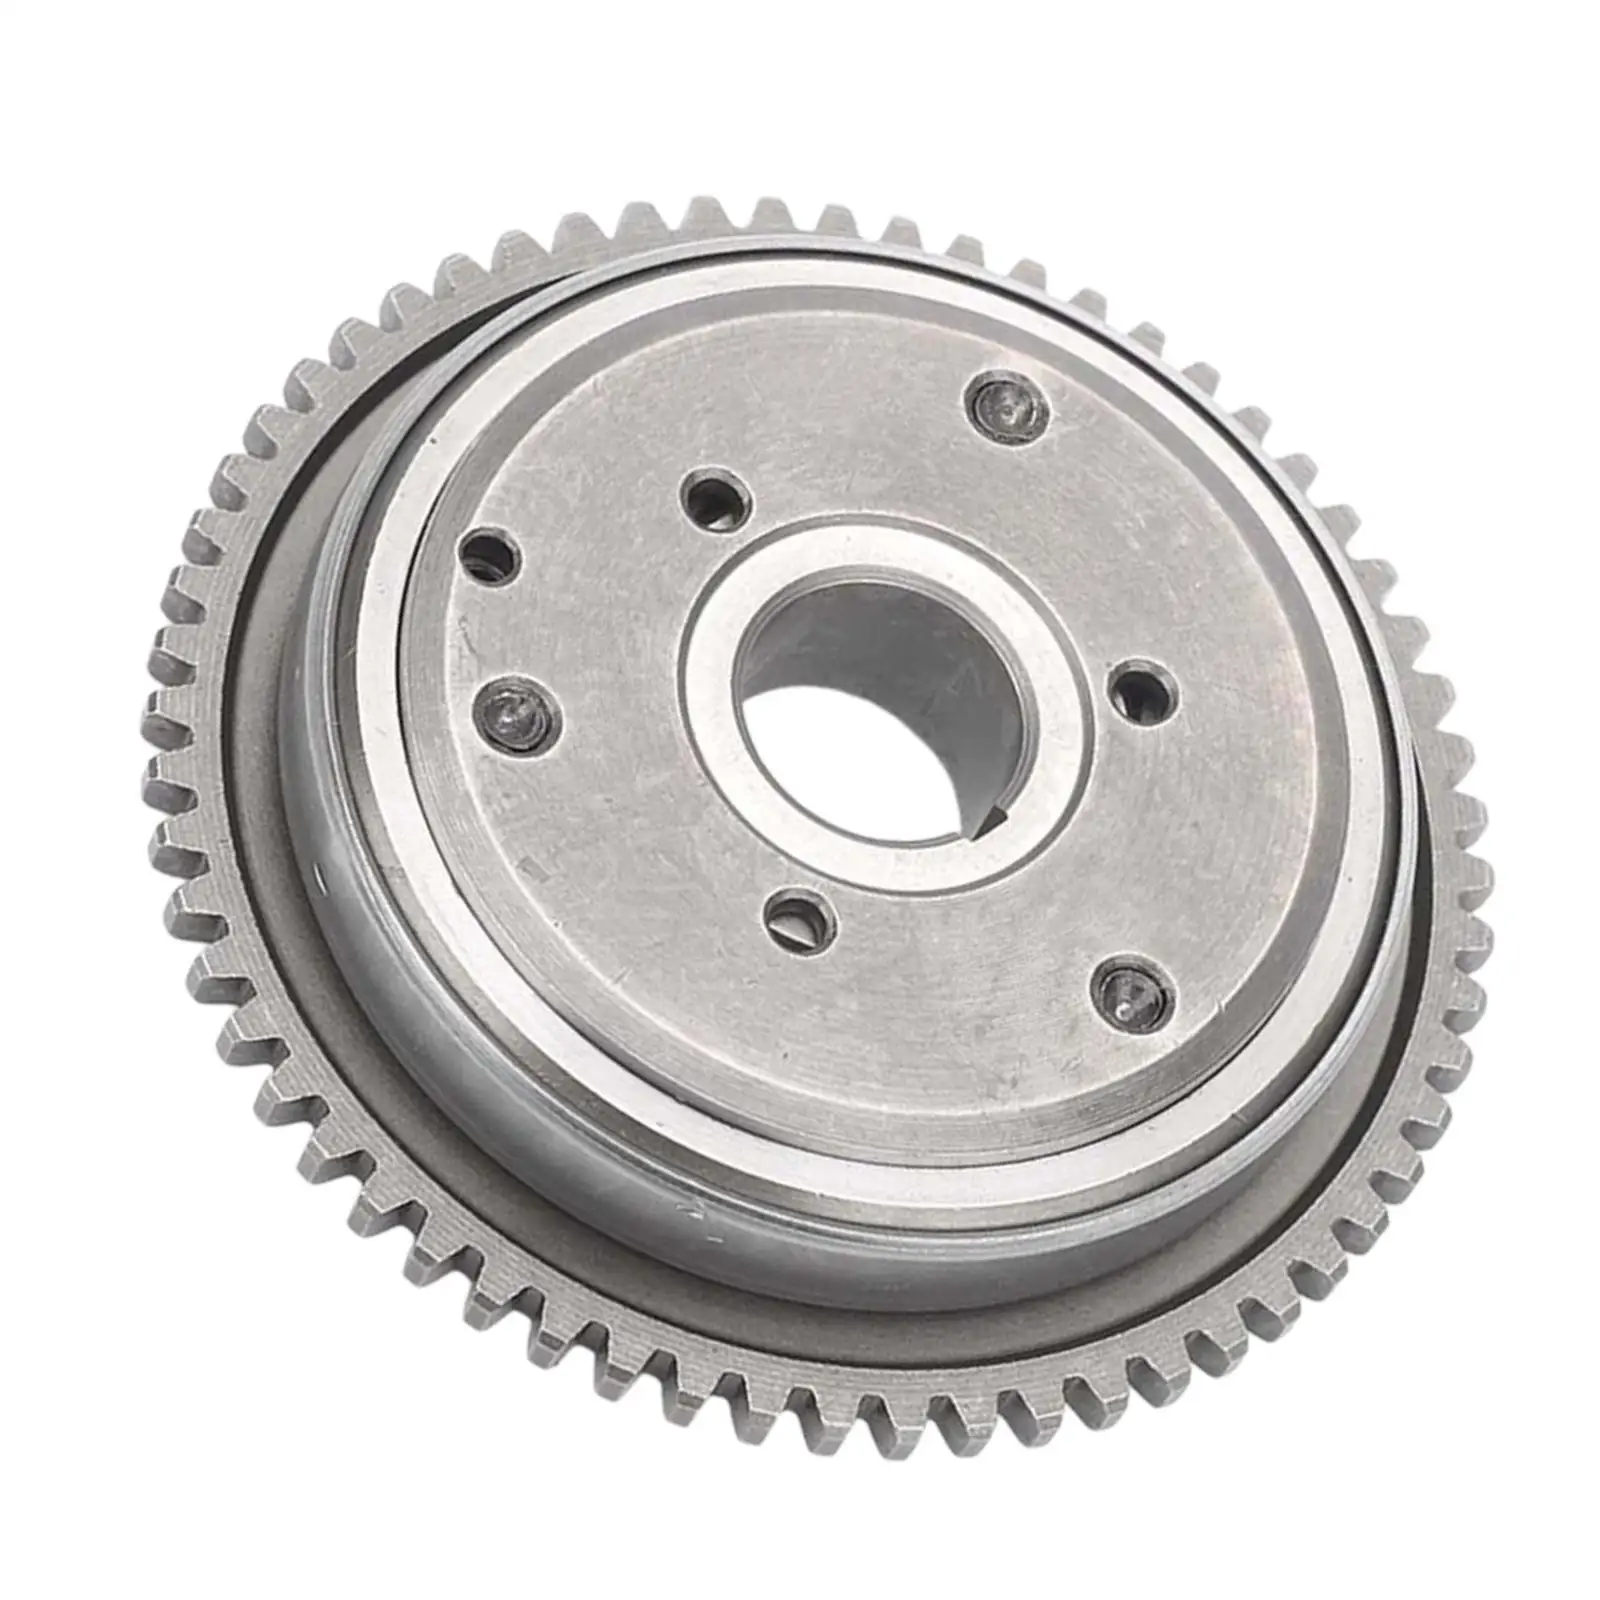 Starter Clutch Bearing Gear Alloy Steel Spare Parts for 150cc 125cc Gy6